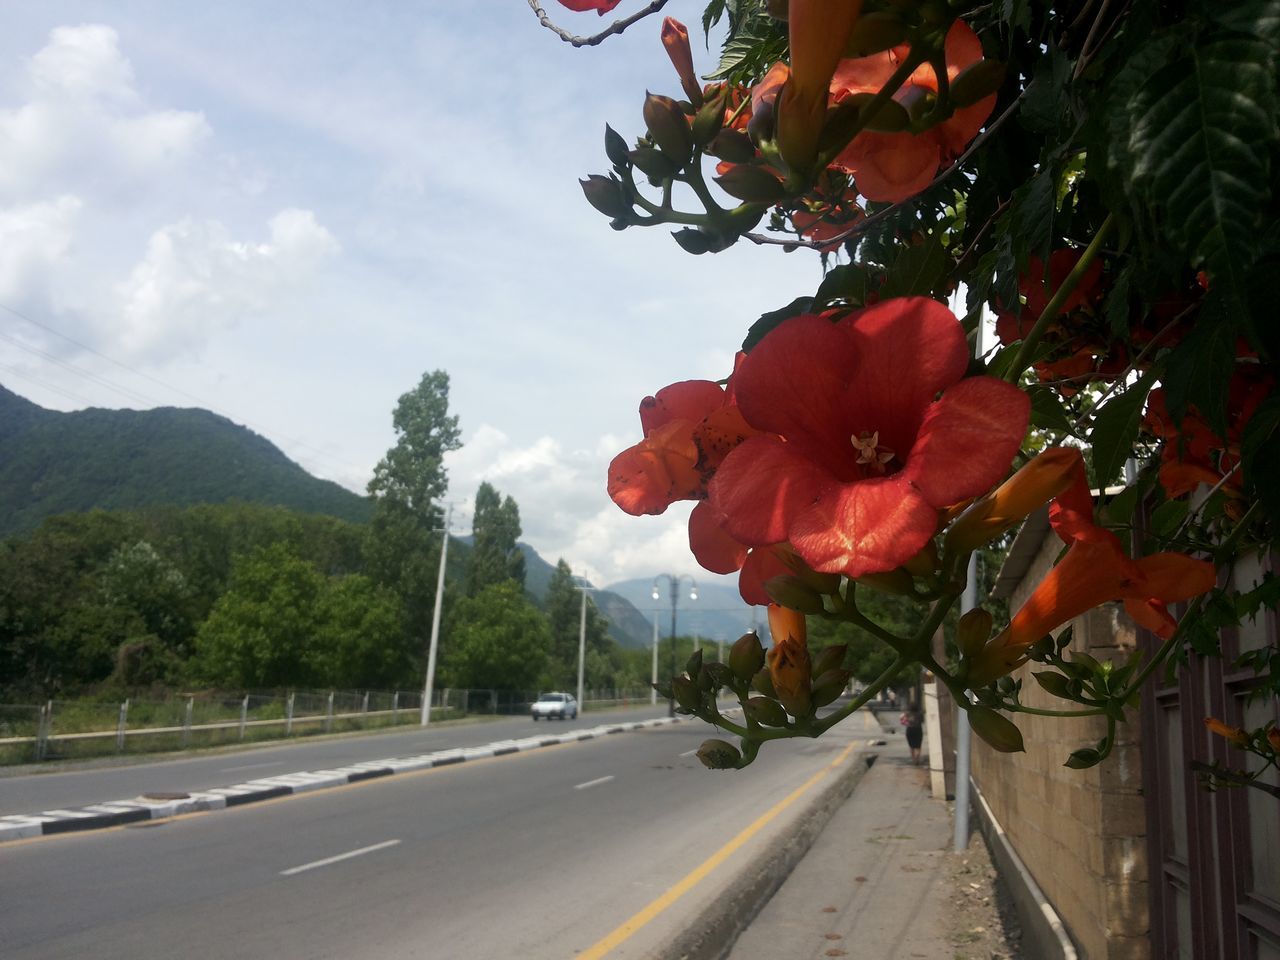 tree, flower, sky, road, transportation, growth, street, cloud - sky, the way forward, nature, beauty in nature, land vehicle, plant, bicycle, red, car, outdoors, day, incidental people, sunlight